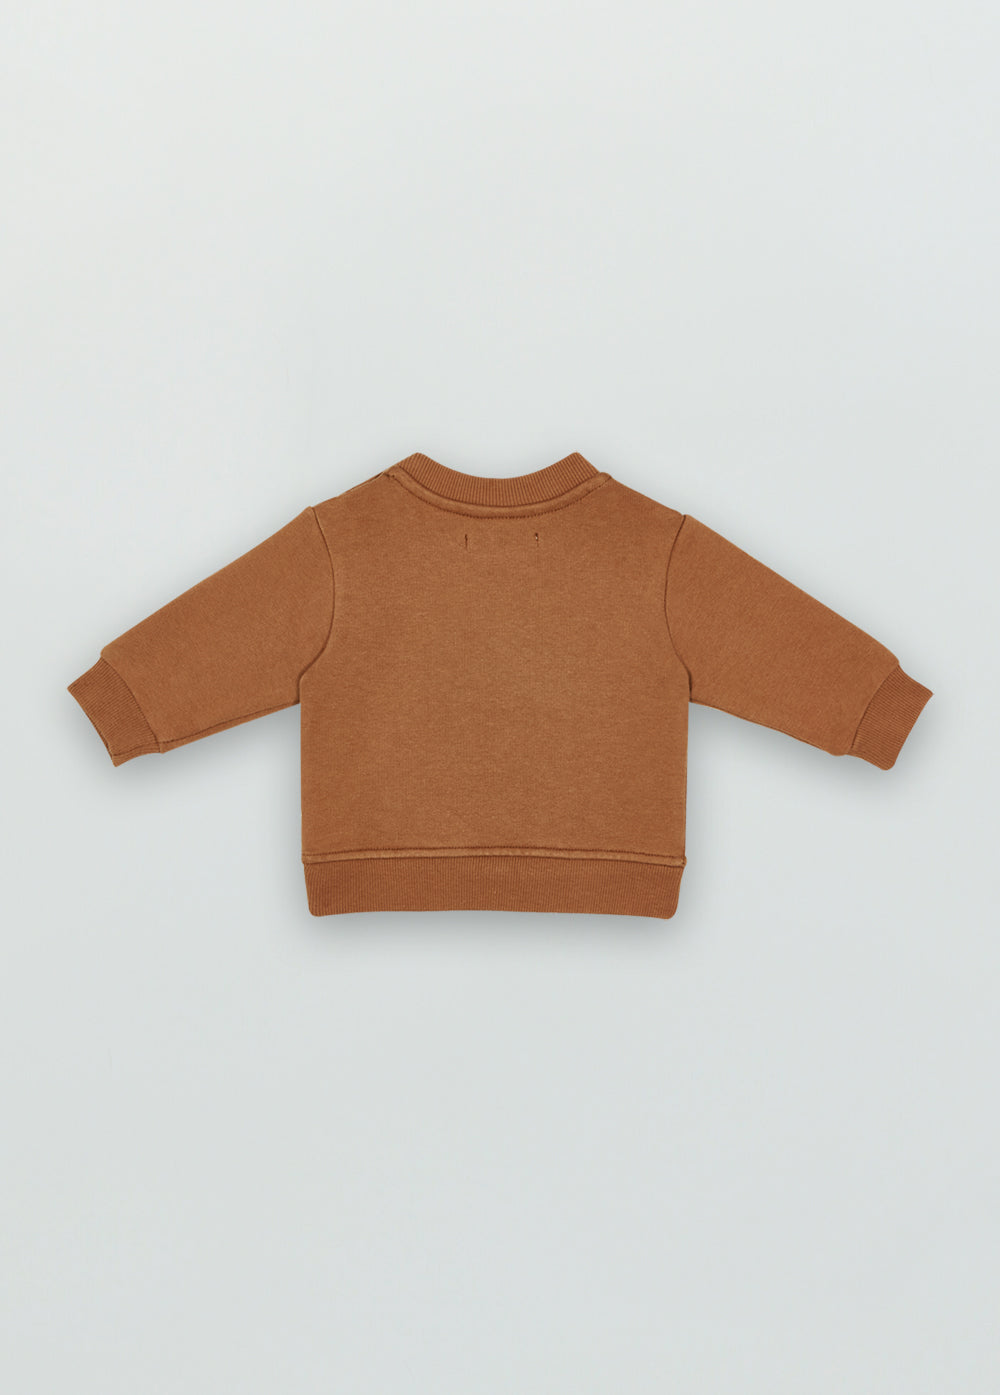 The art of baby sweater toffe